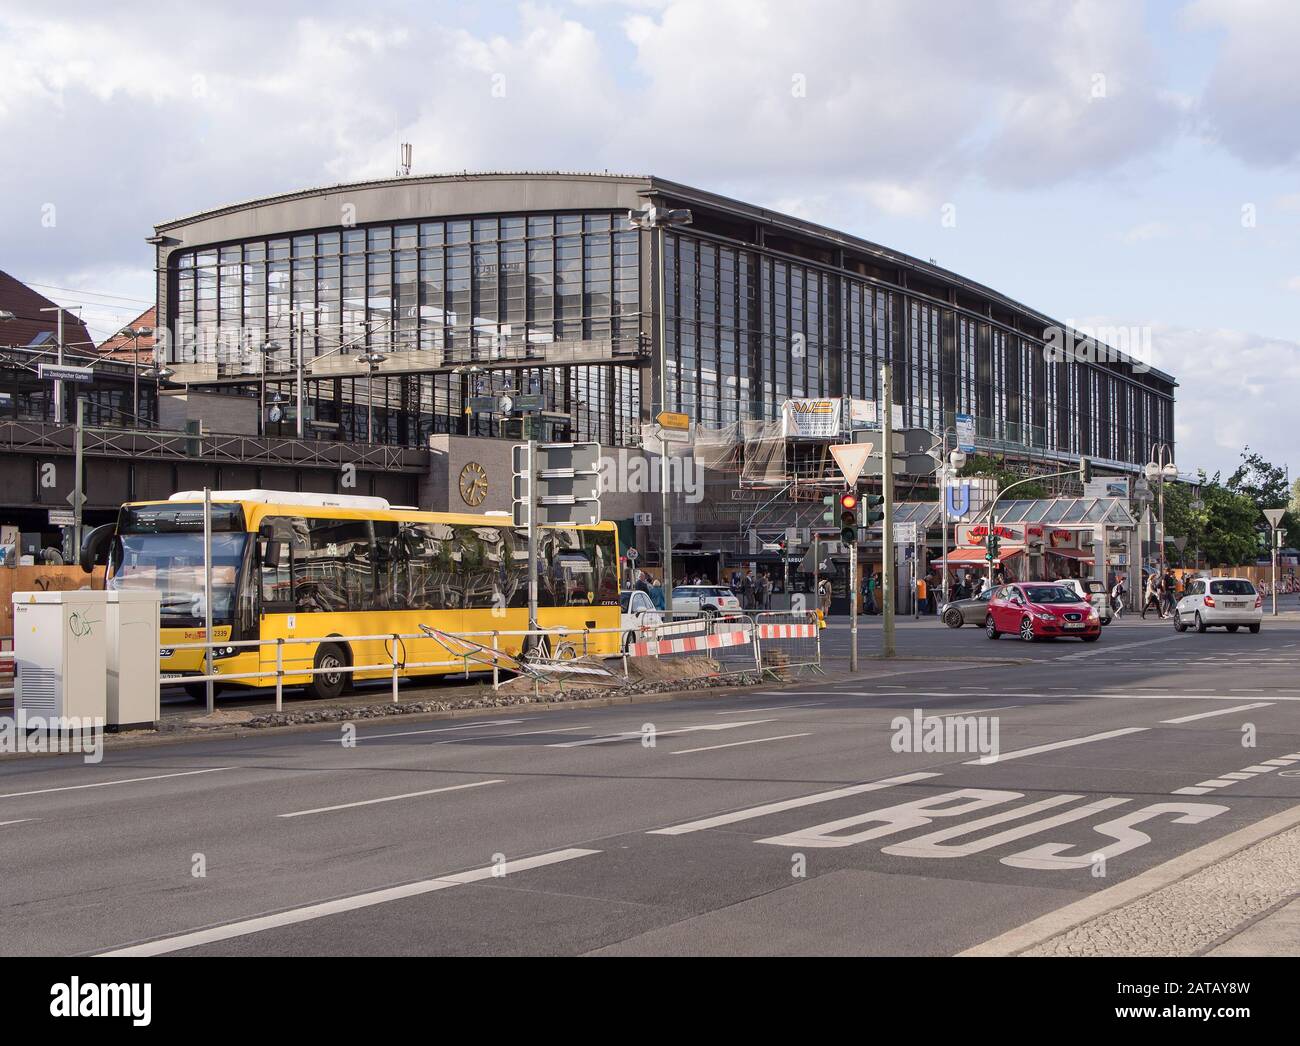 BERLIN, GERMANY - JULY 6, 2016: Bahnhof Zoo, central station with a yellow city bus Stock Photo